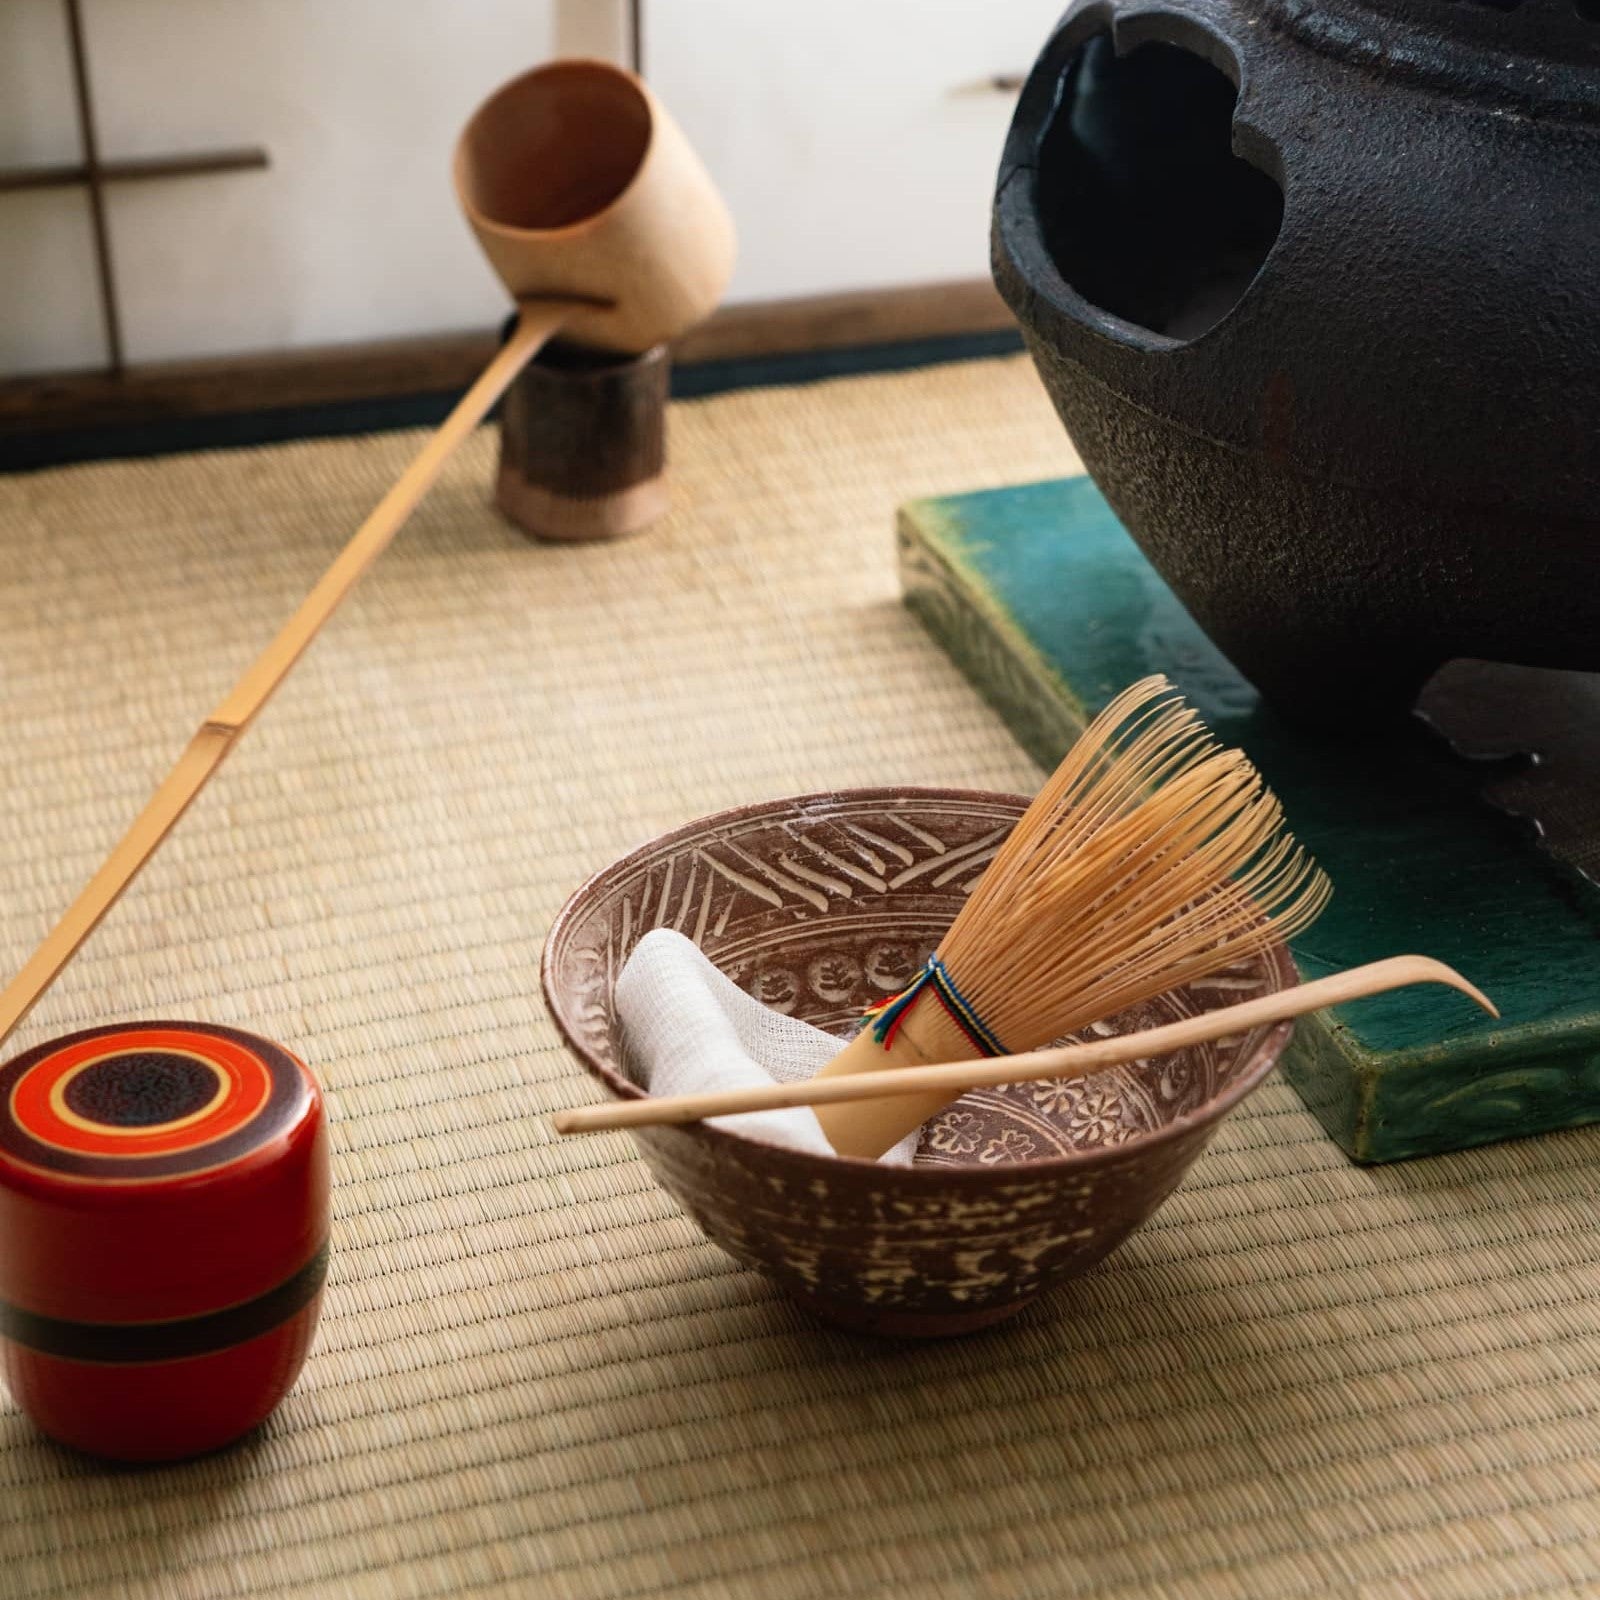 Why Use Bamboo in Pottery and Ceramic Tools?